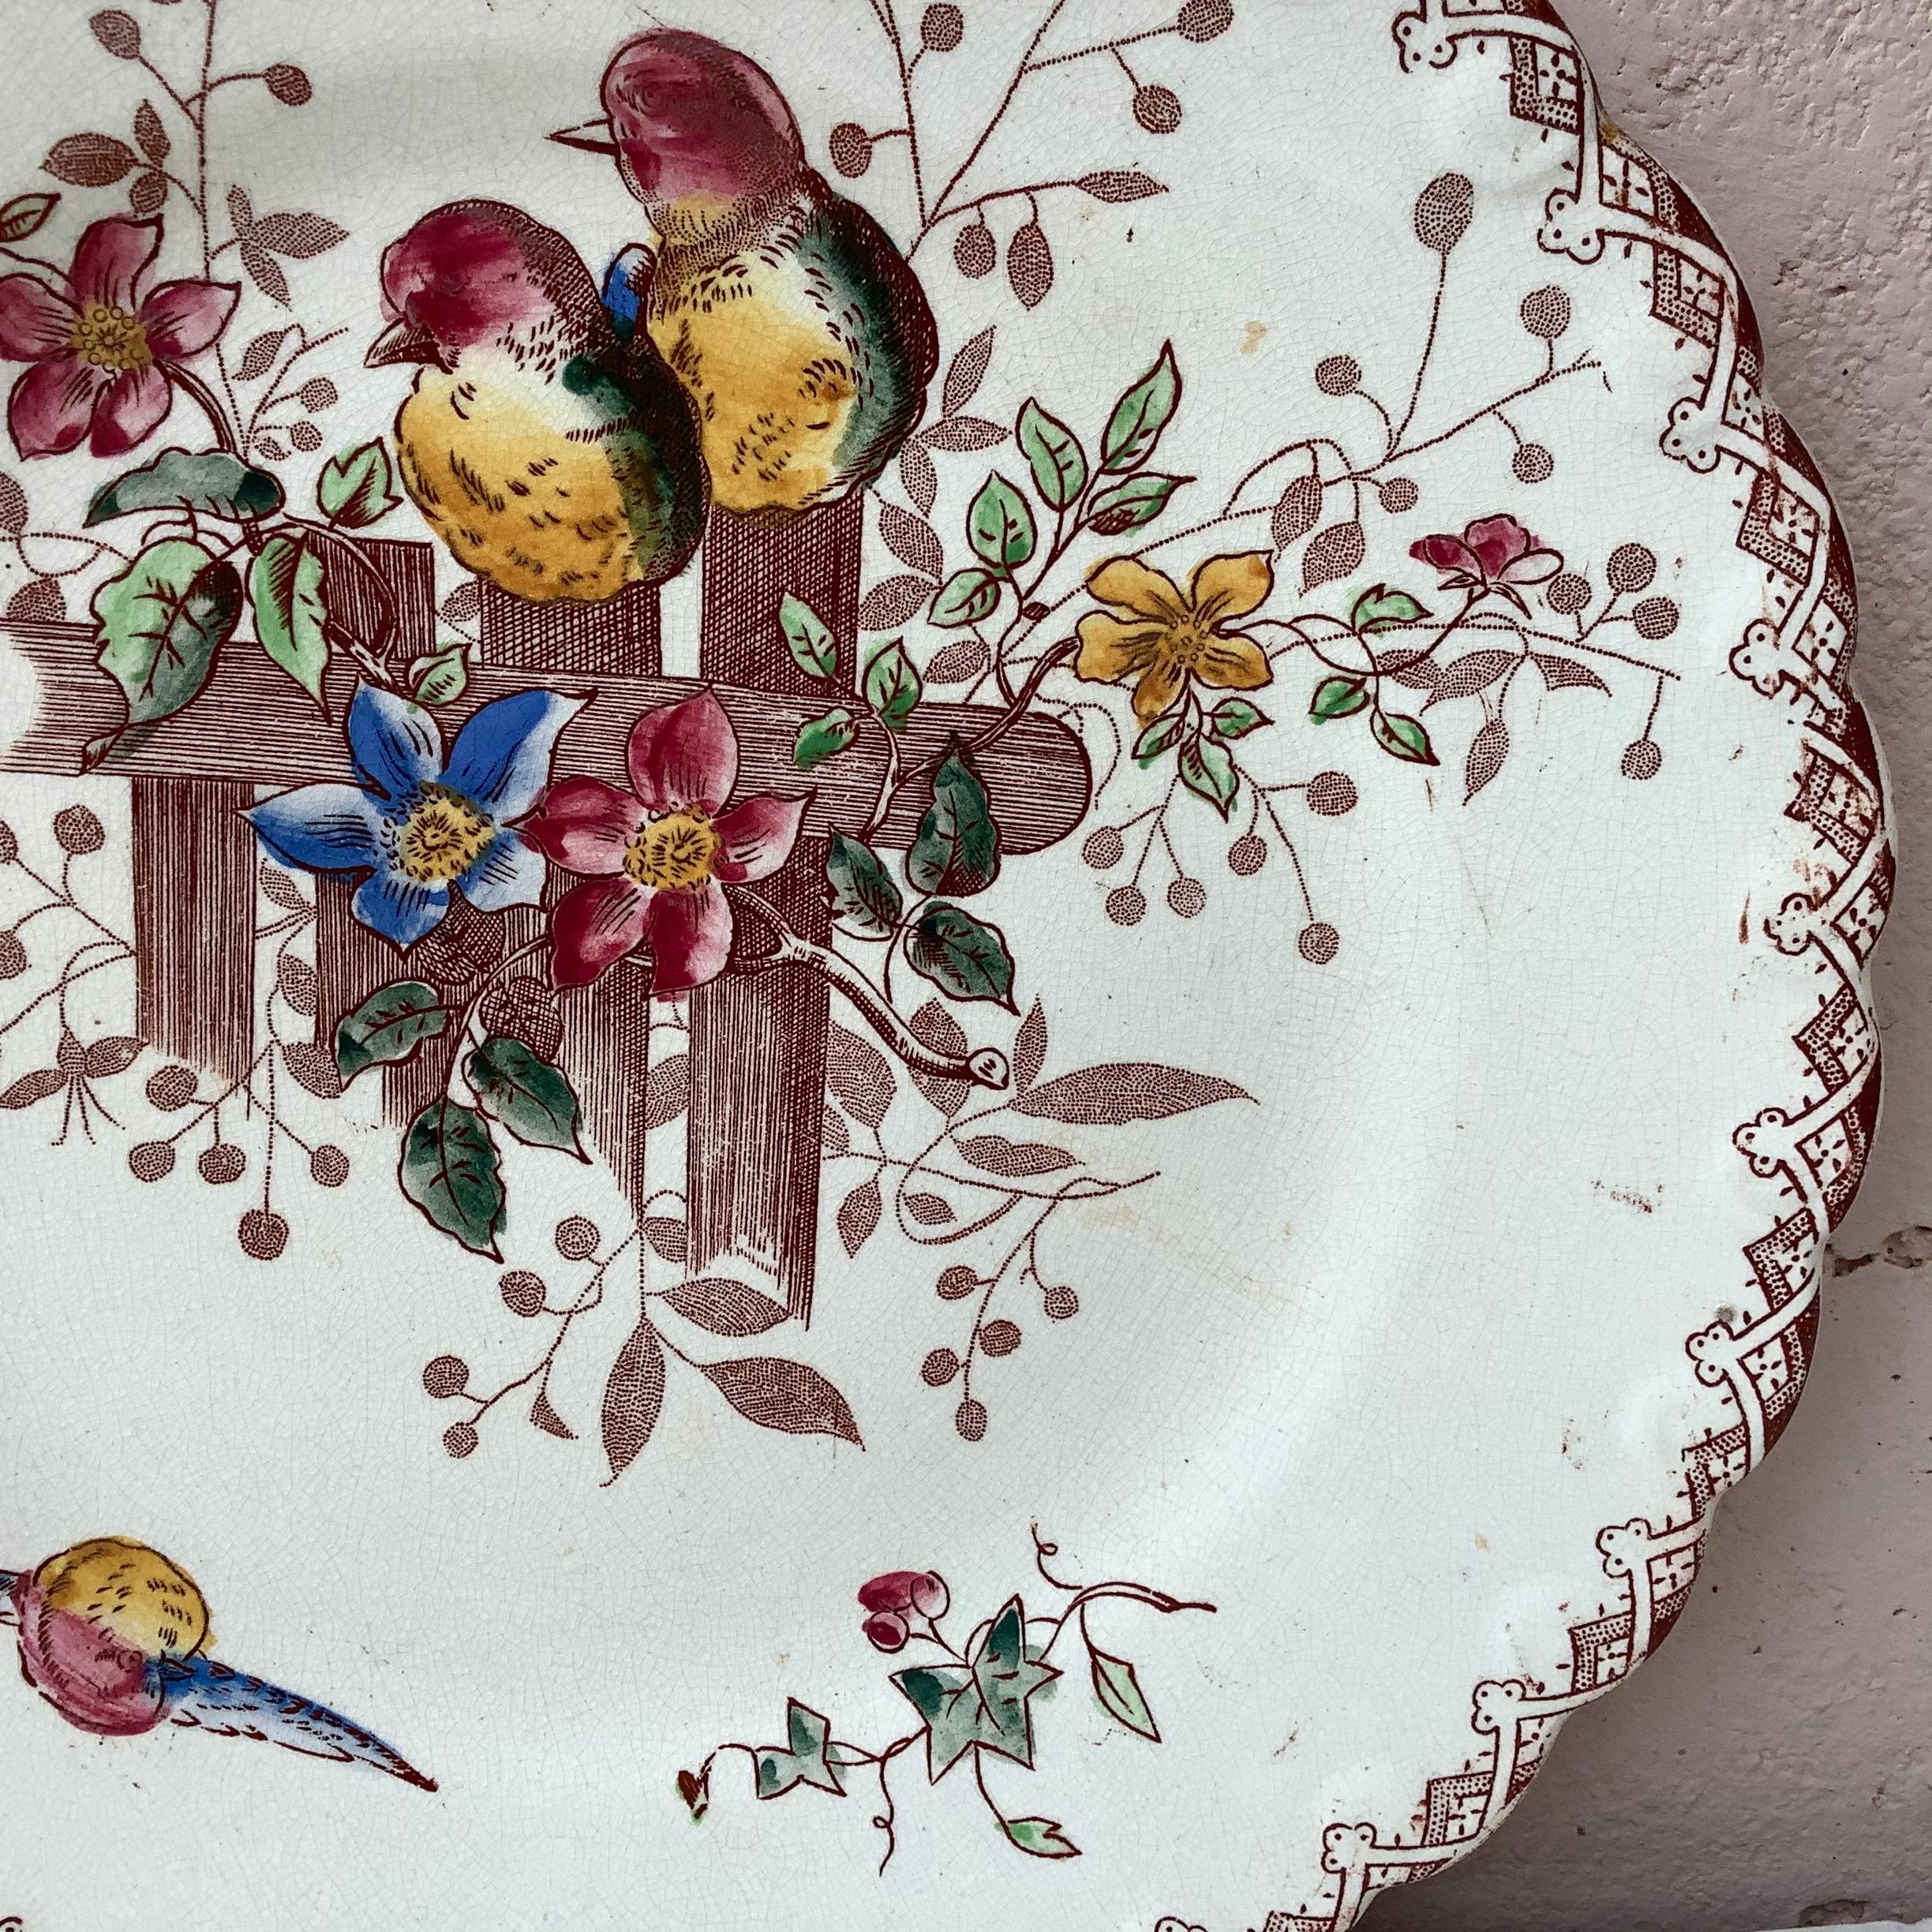 Aesthetic Movement French Faience Plate with Birds and Flowers Onnaing, circa 1900